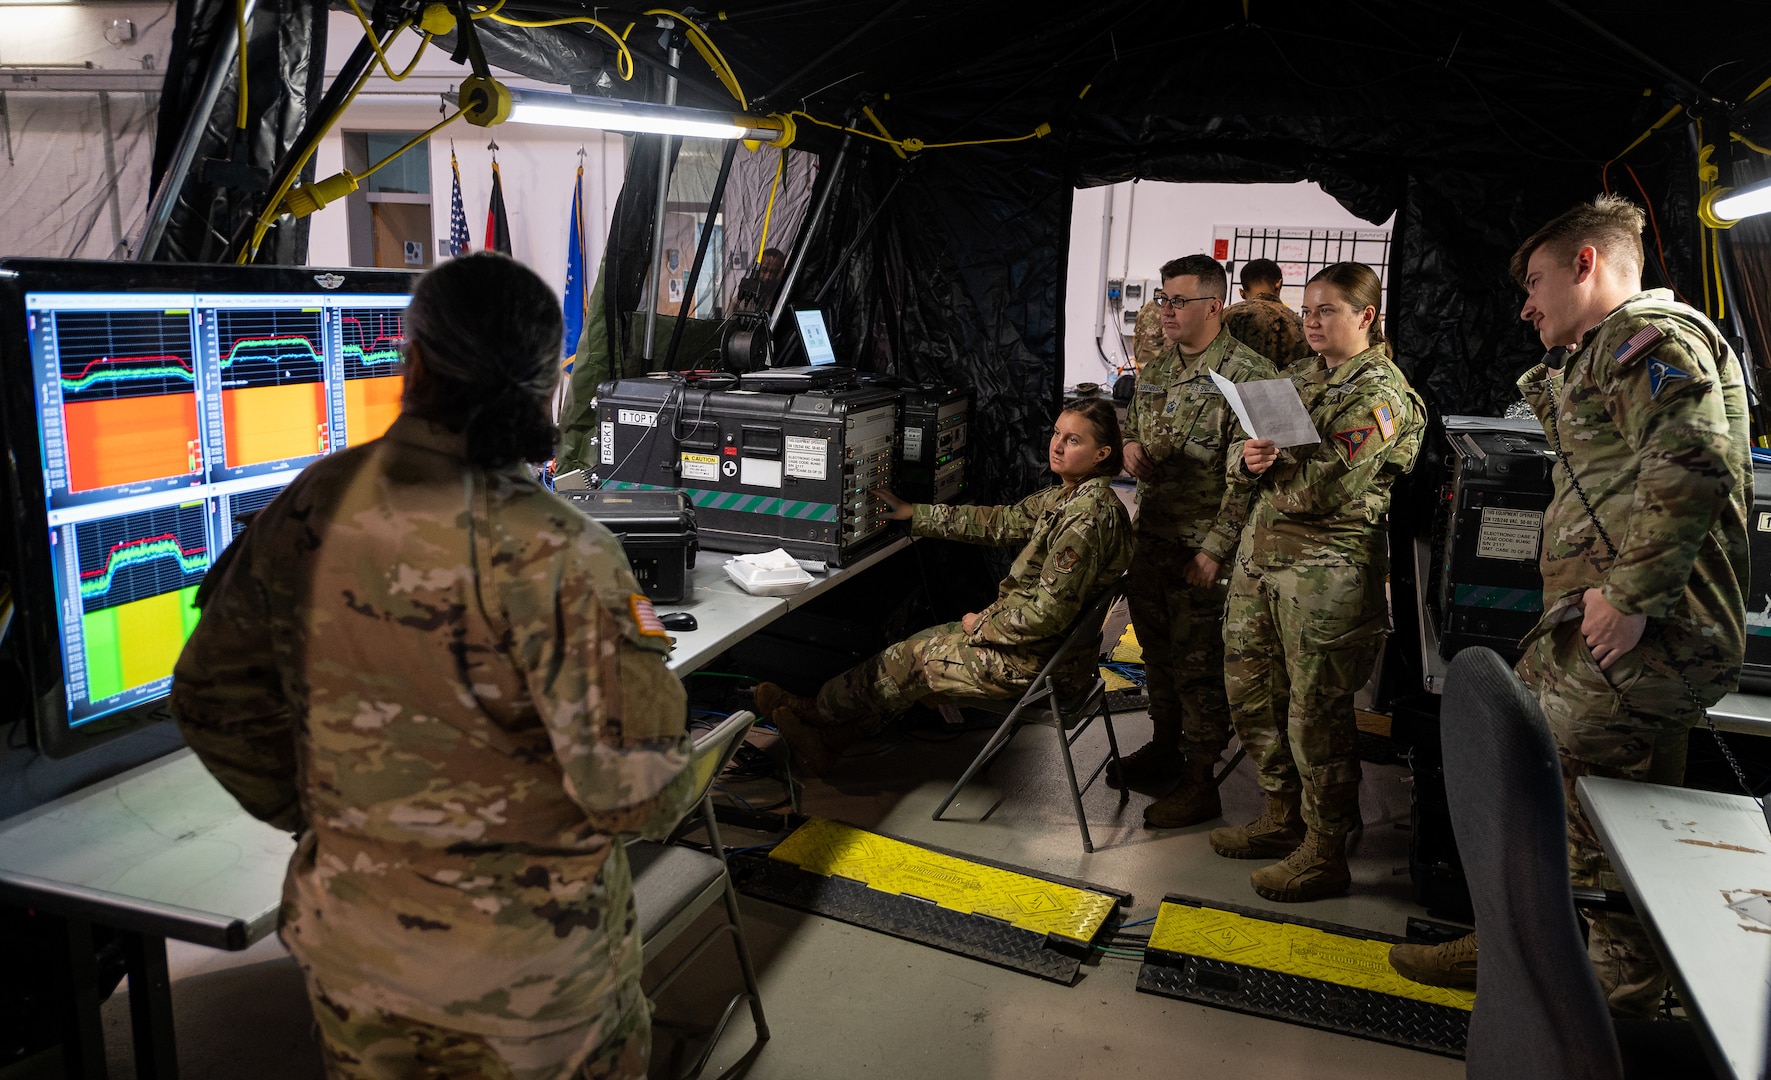 Military personnel assigned to the 527th/26th Space Aggressor Squadron and 2d Multi-Domain Task Force provide real-time monitoring of health and wellness for military satellites during Exercise HEAVY RAIN 23, Nov. 16, 2023 at Ramstein Air Base, Germany. HEAVY RAIN is a U.S. Air Forces in Europe-led command and control exercise that tests and evaluates communication and data-sharing capabilities among the joint force, NATO Allies and partners. (U.S. Air Force Photo by Senior Airman Edgar Grimaldo)